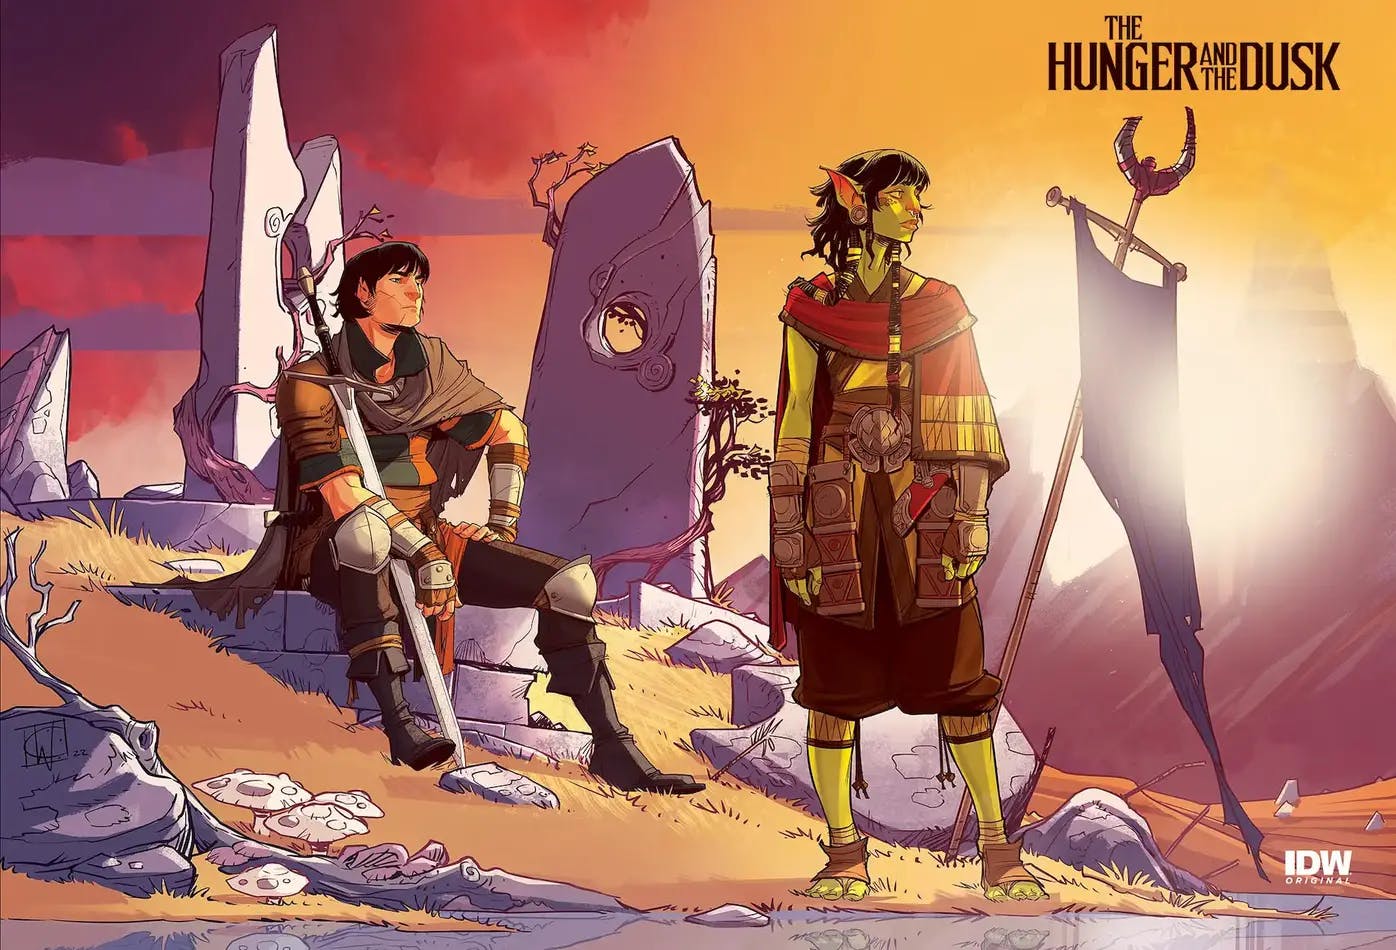 The Hunger and the Dusk by G. Willow Wilson and Chris Wildgoose